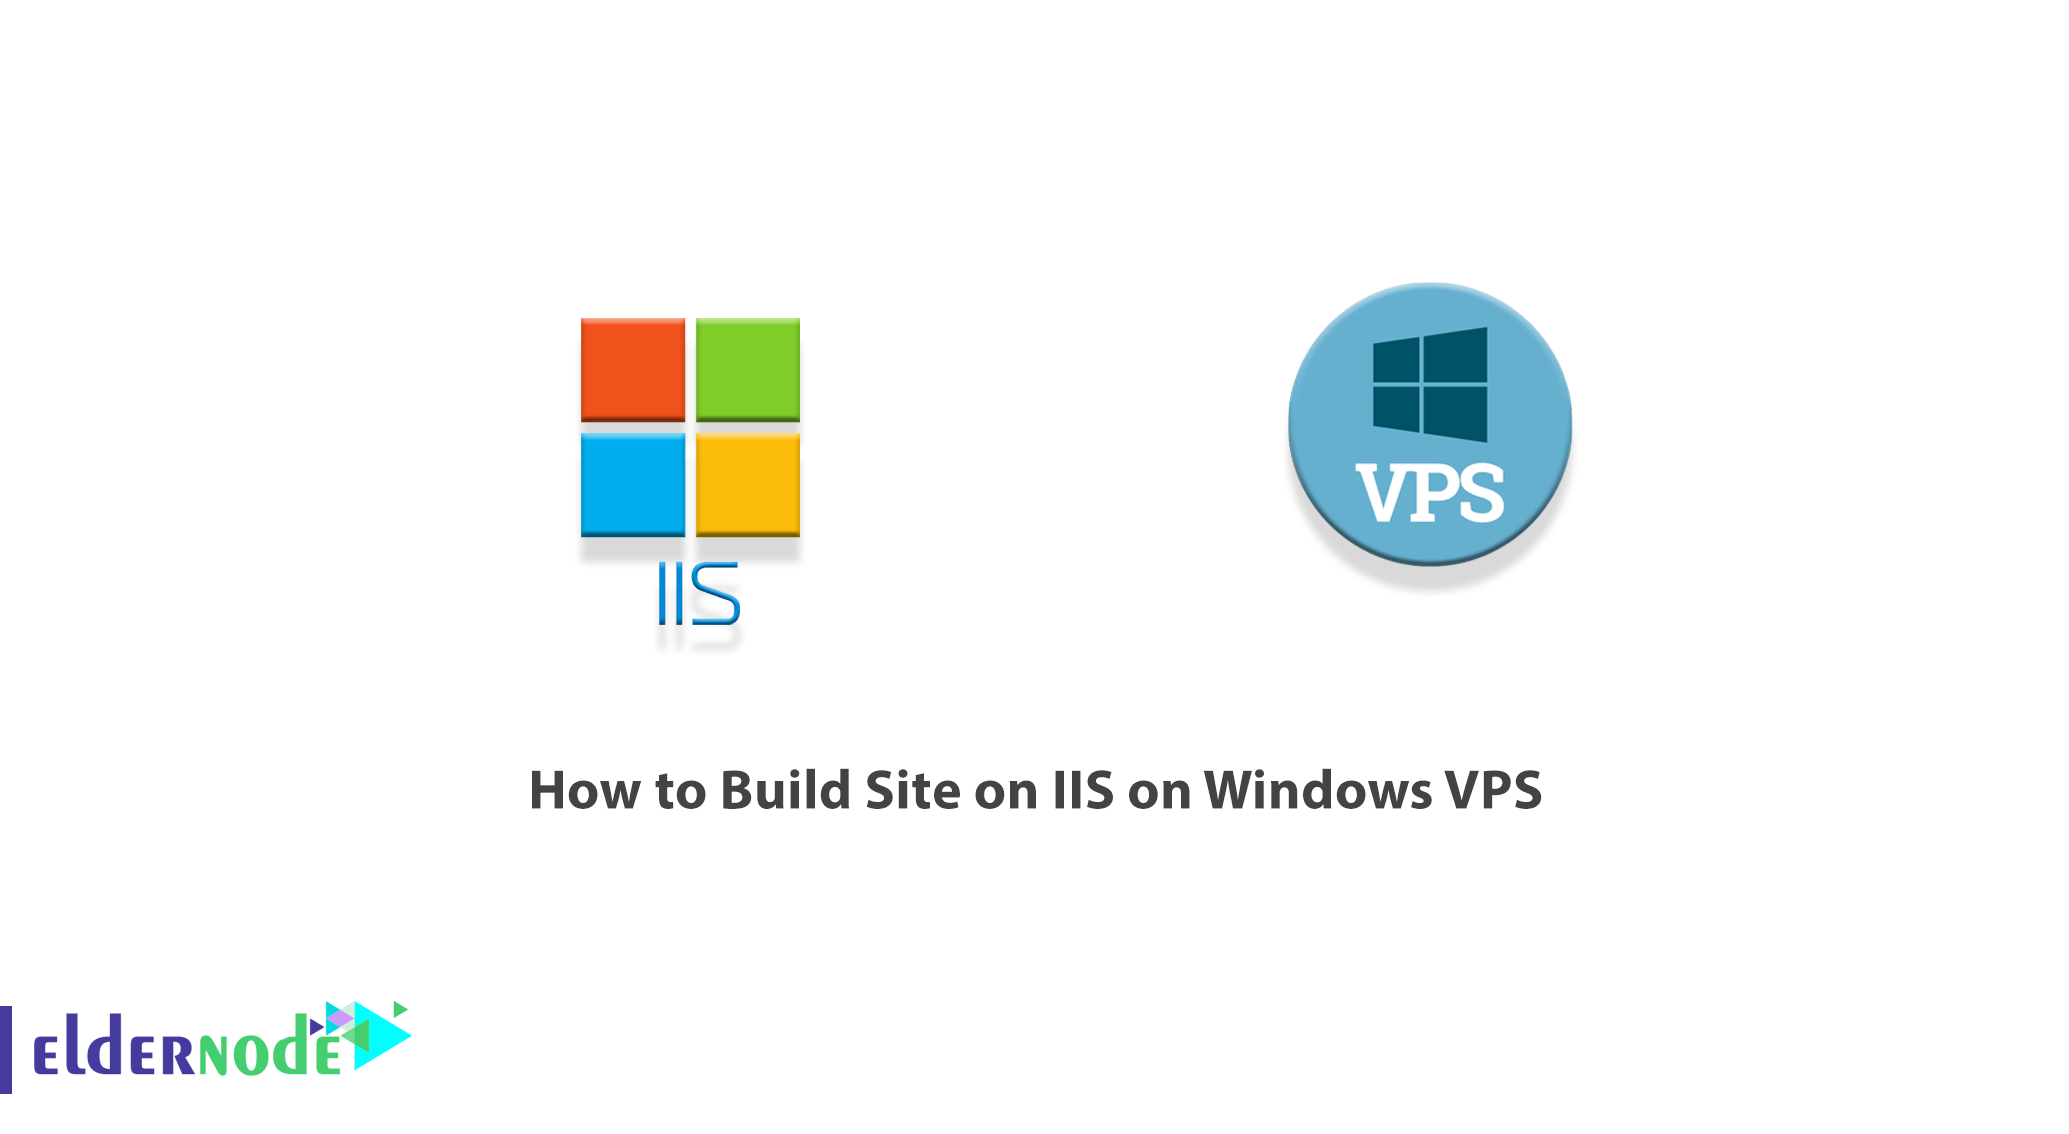 How to Build Site on IIS on Windows VPS